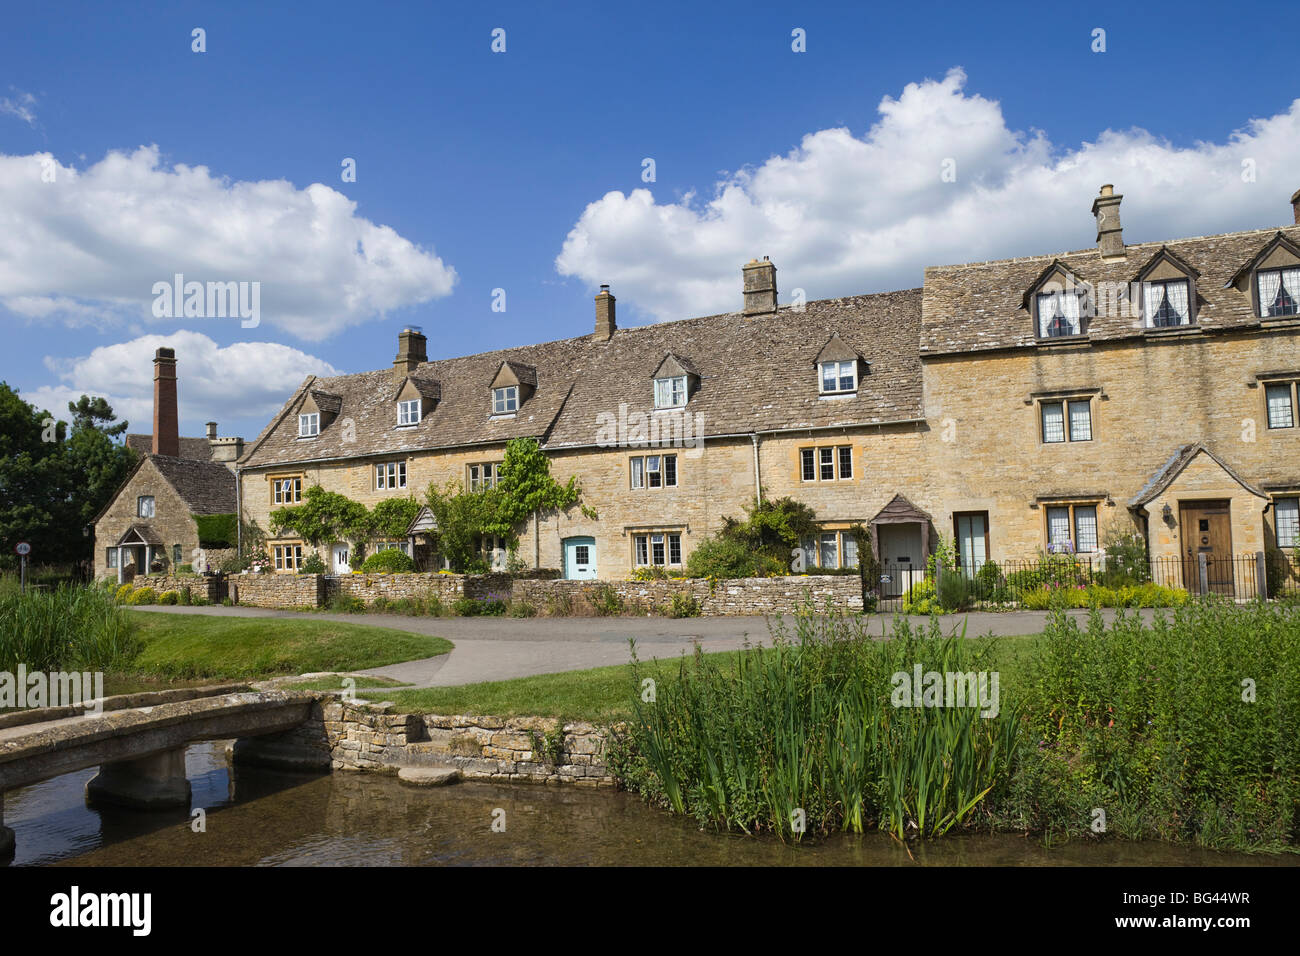 England, Gloustershire, Cotswolds, obere Schlachtung Stockfoto